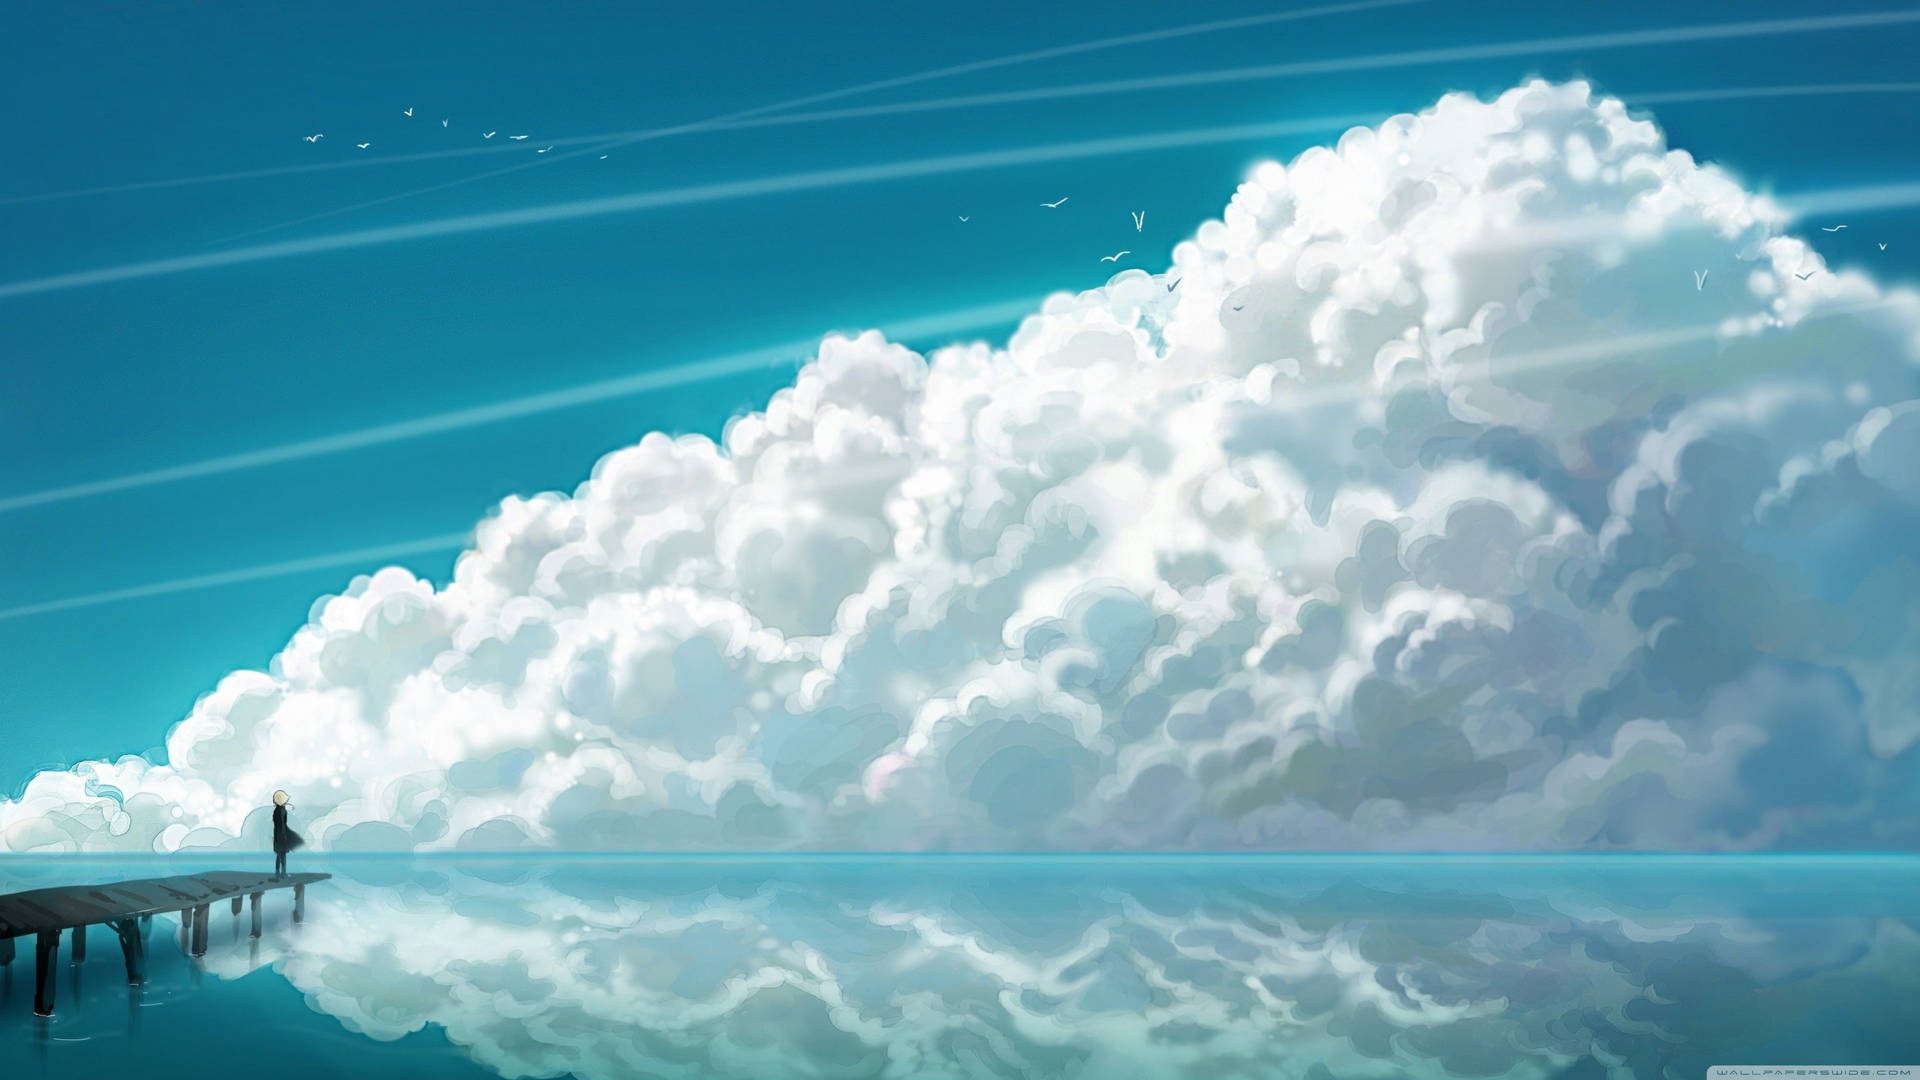 “a Mystical View Of The Sky” Background